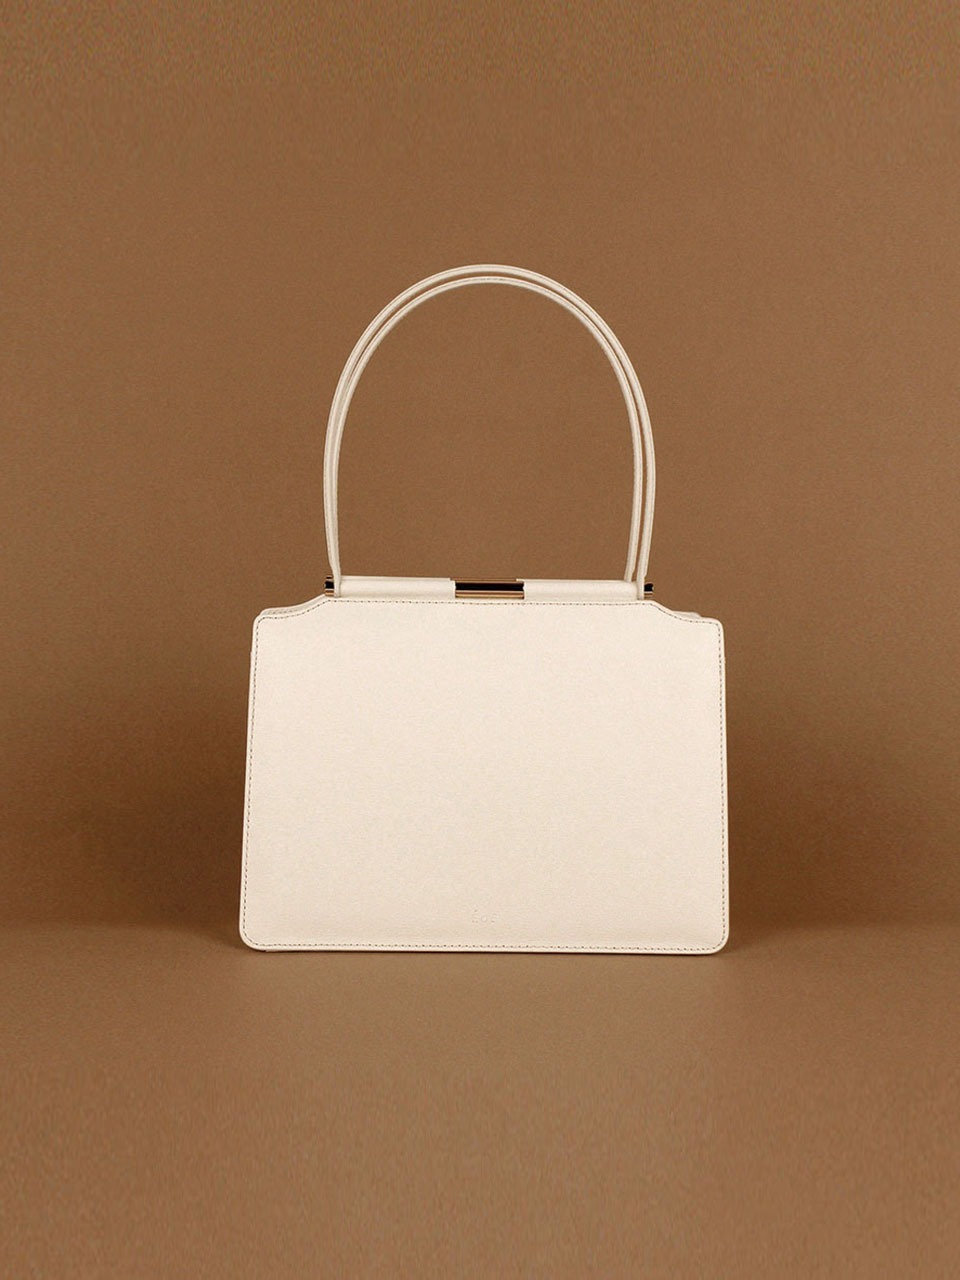 SAC RONÉ CLASSIQUE IN IVORY